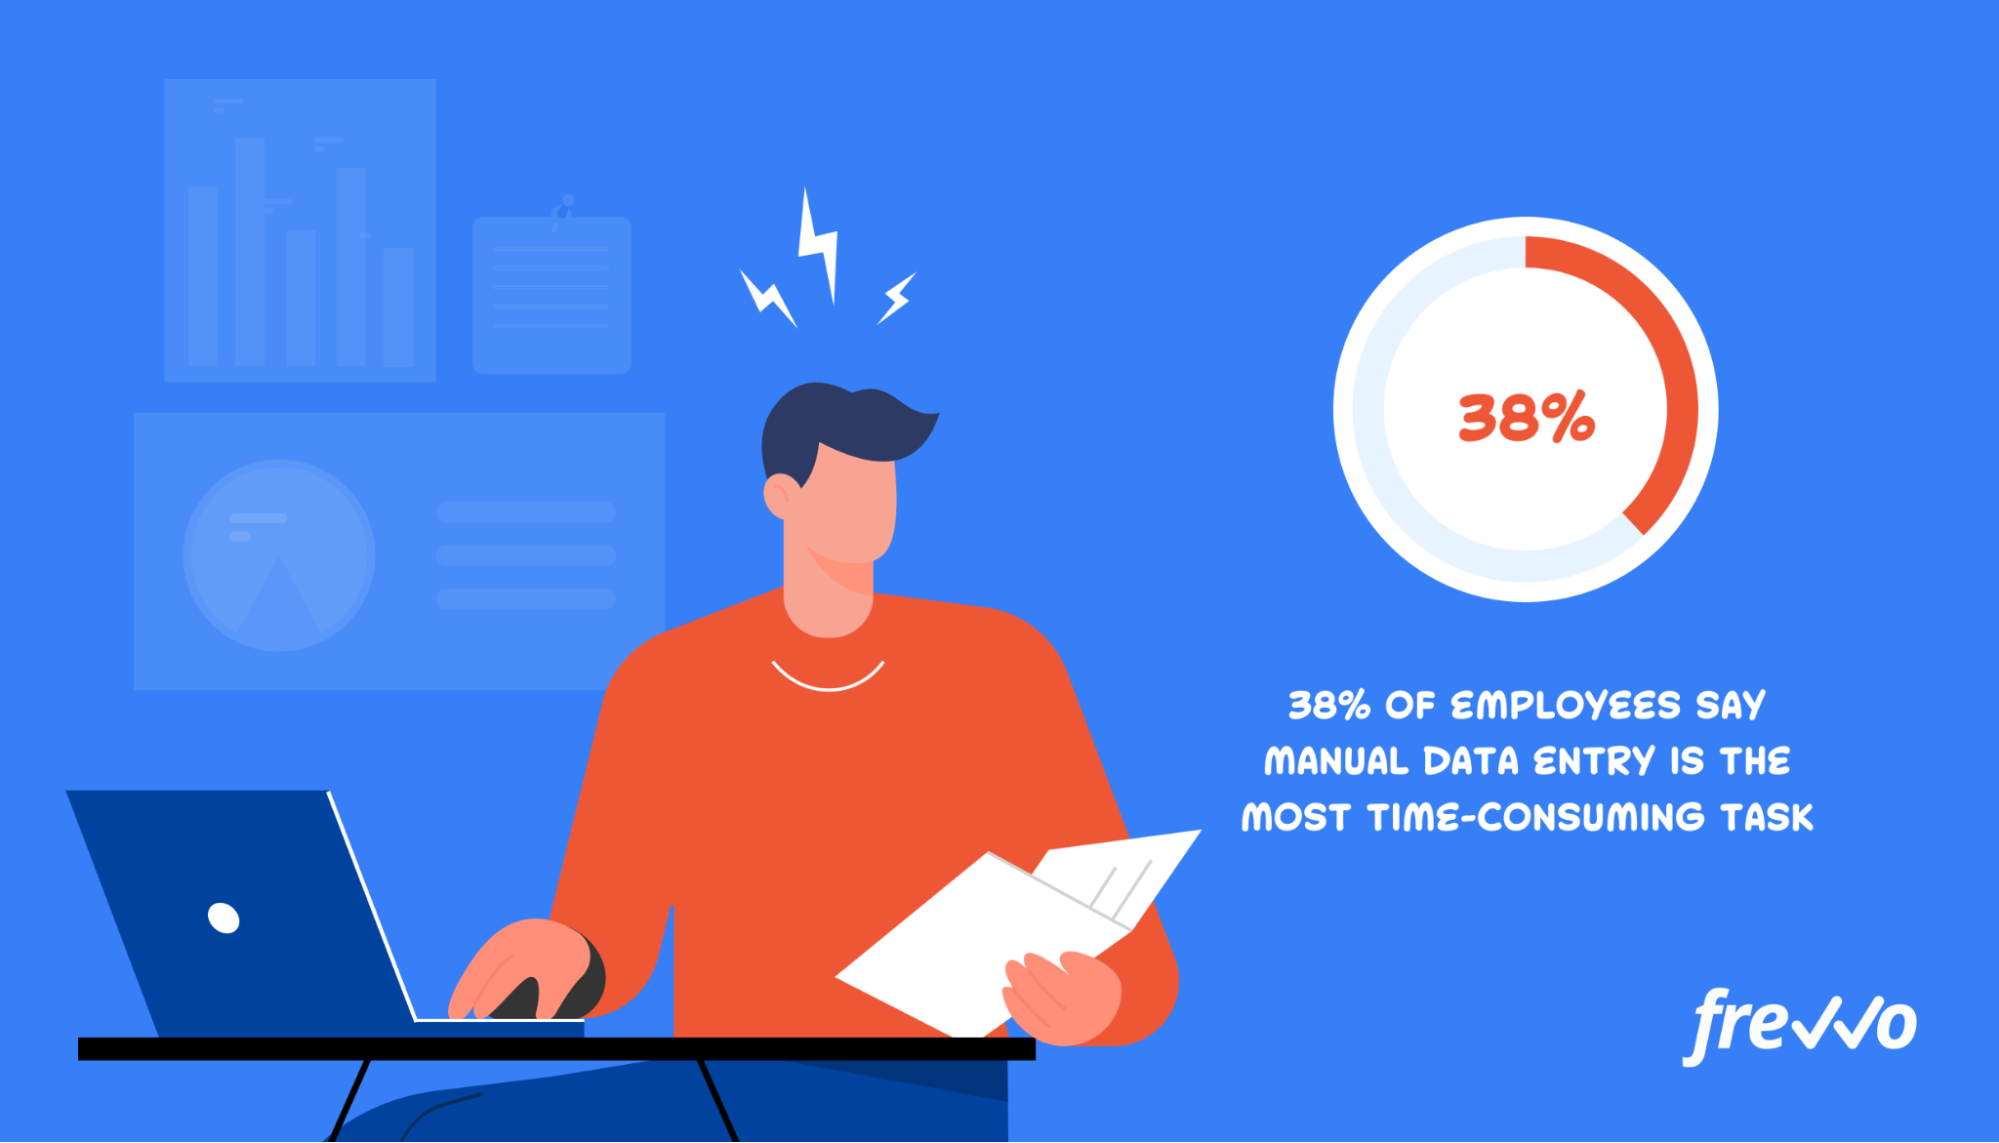 38% of employees say manual data entry is the most time-consuming task